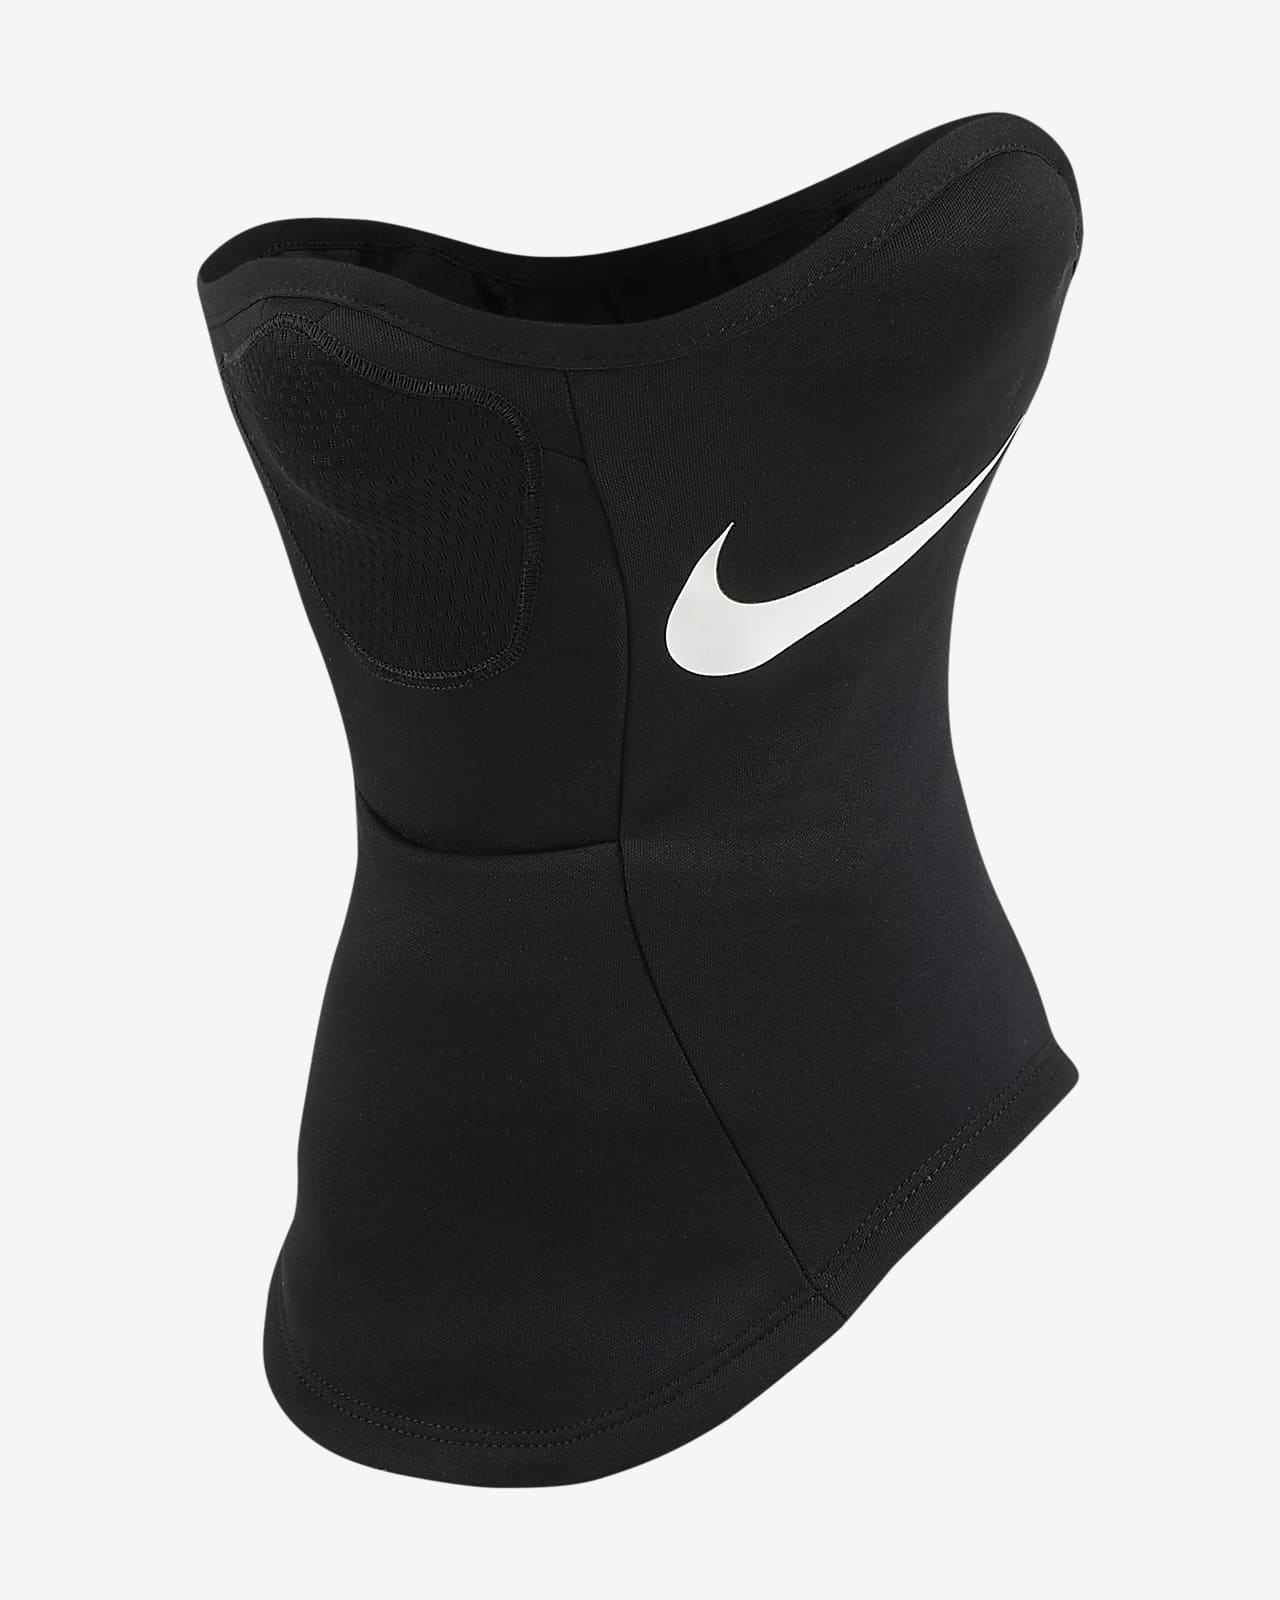 nike hat scarf and glove set